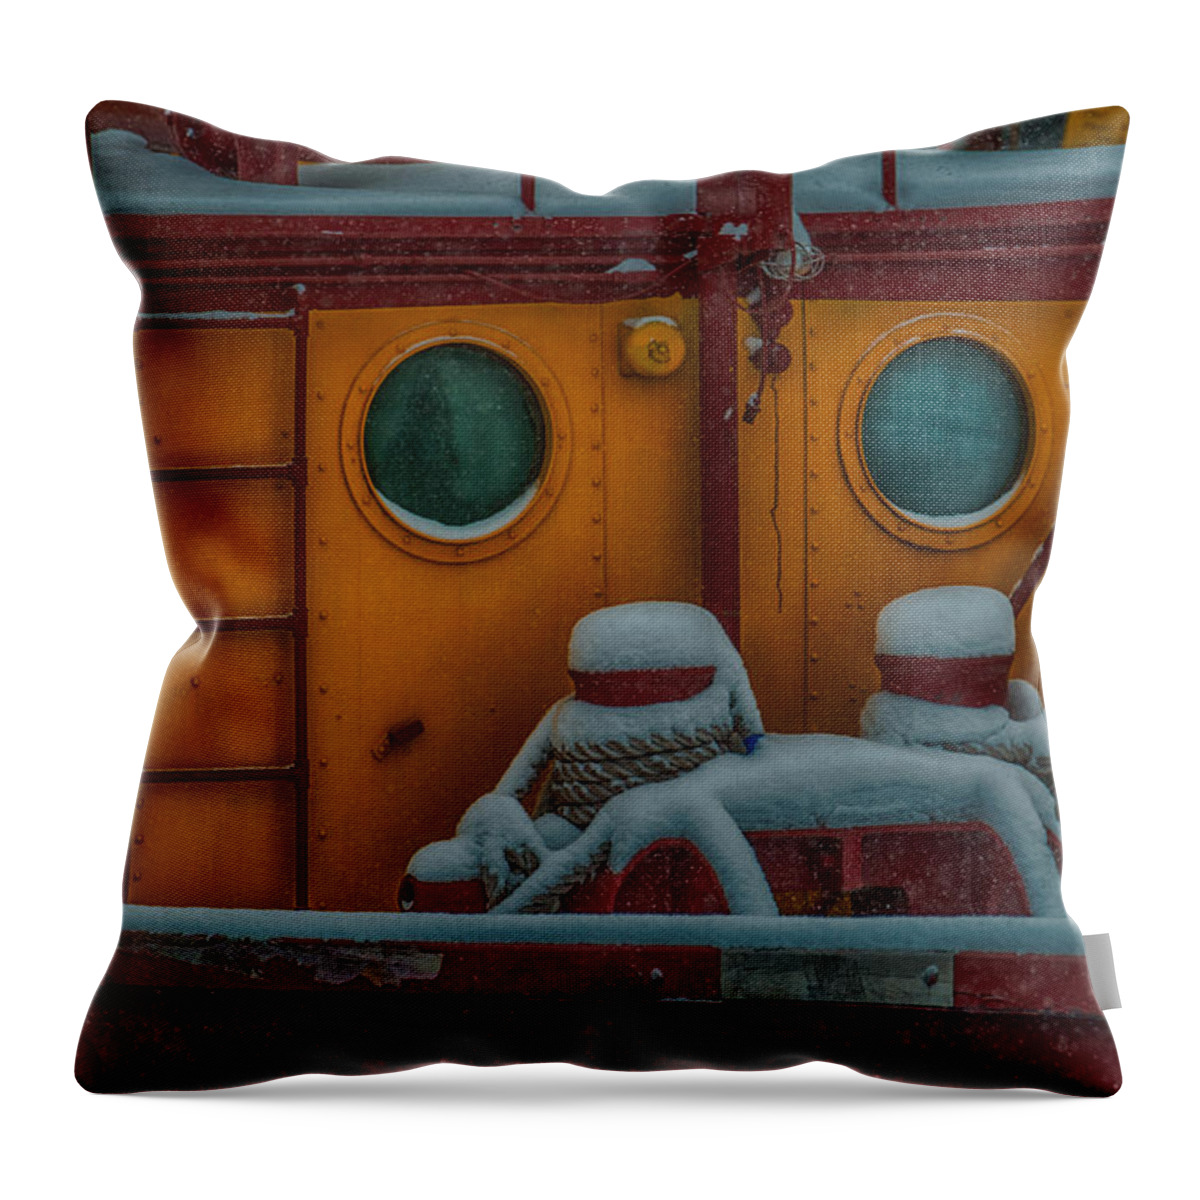 Edna G Throw Pillow featuring the photograph Edna G In The Snow by Paul Freidlund